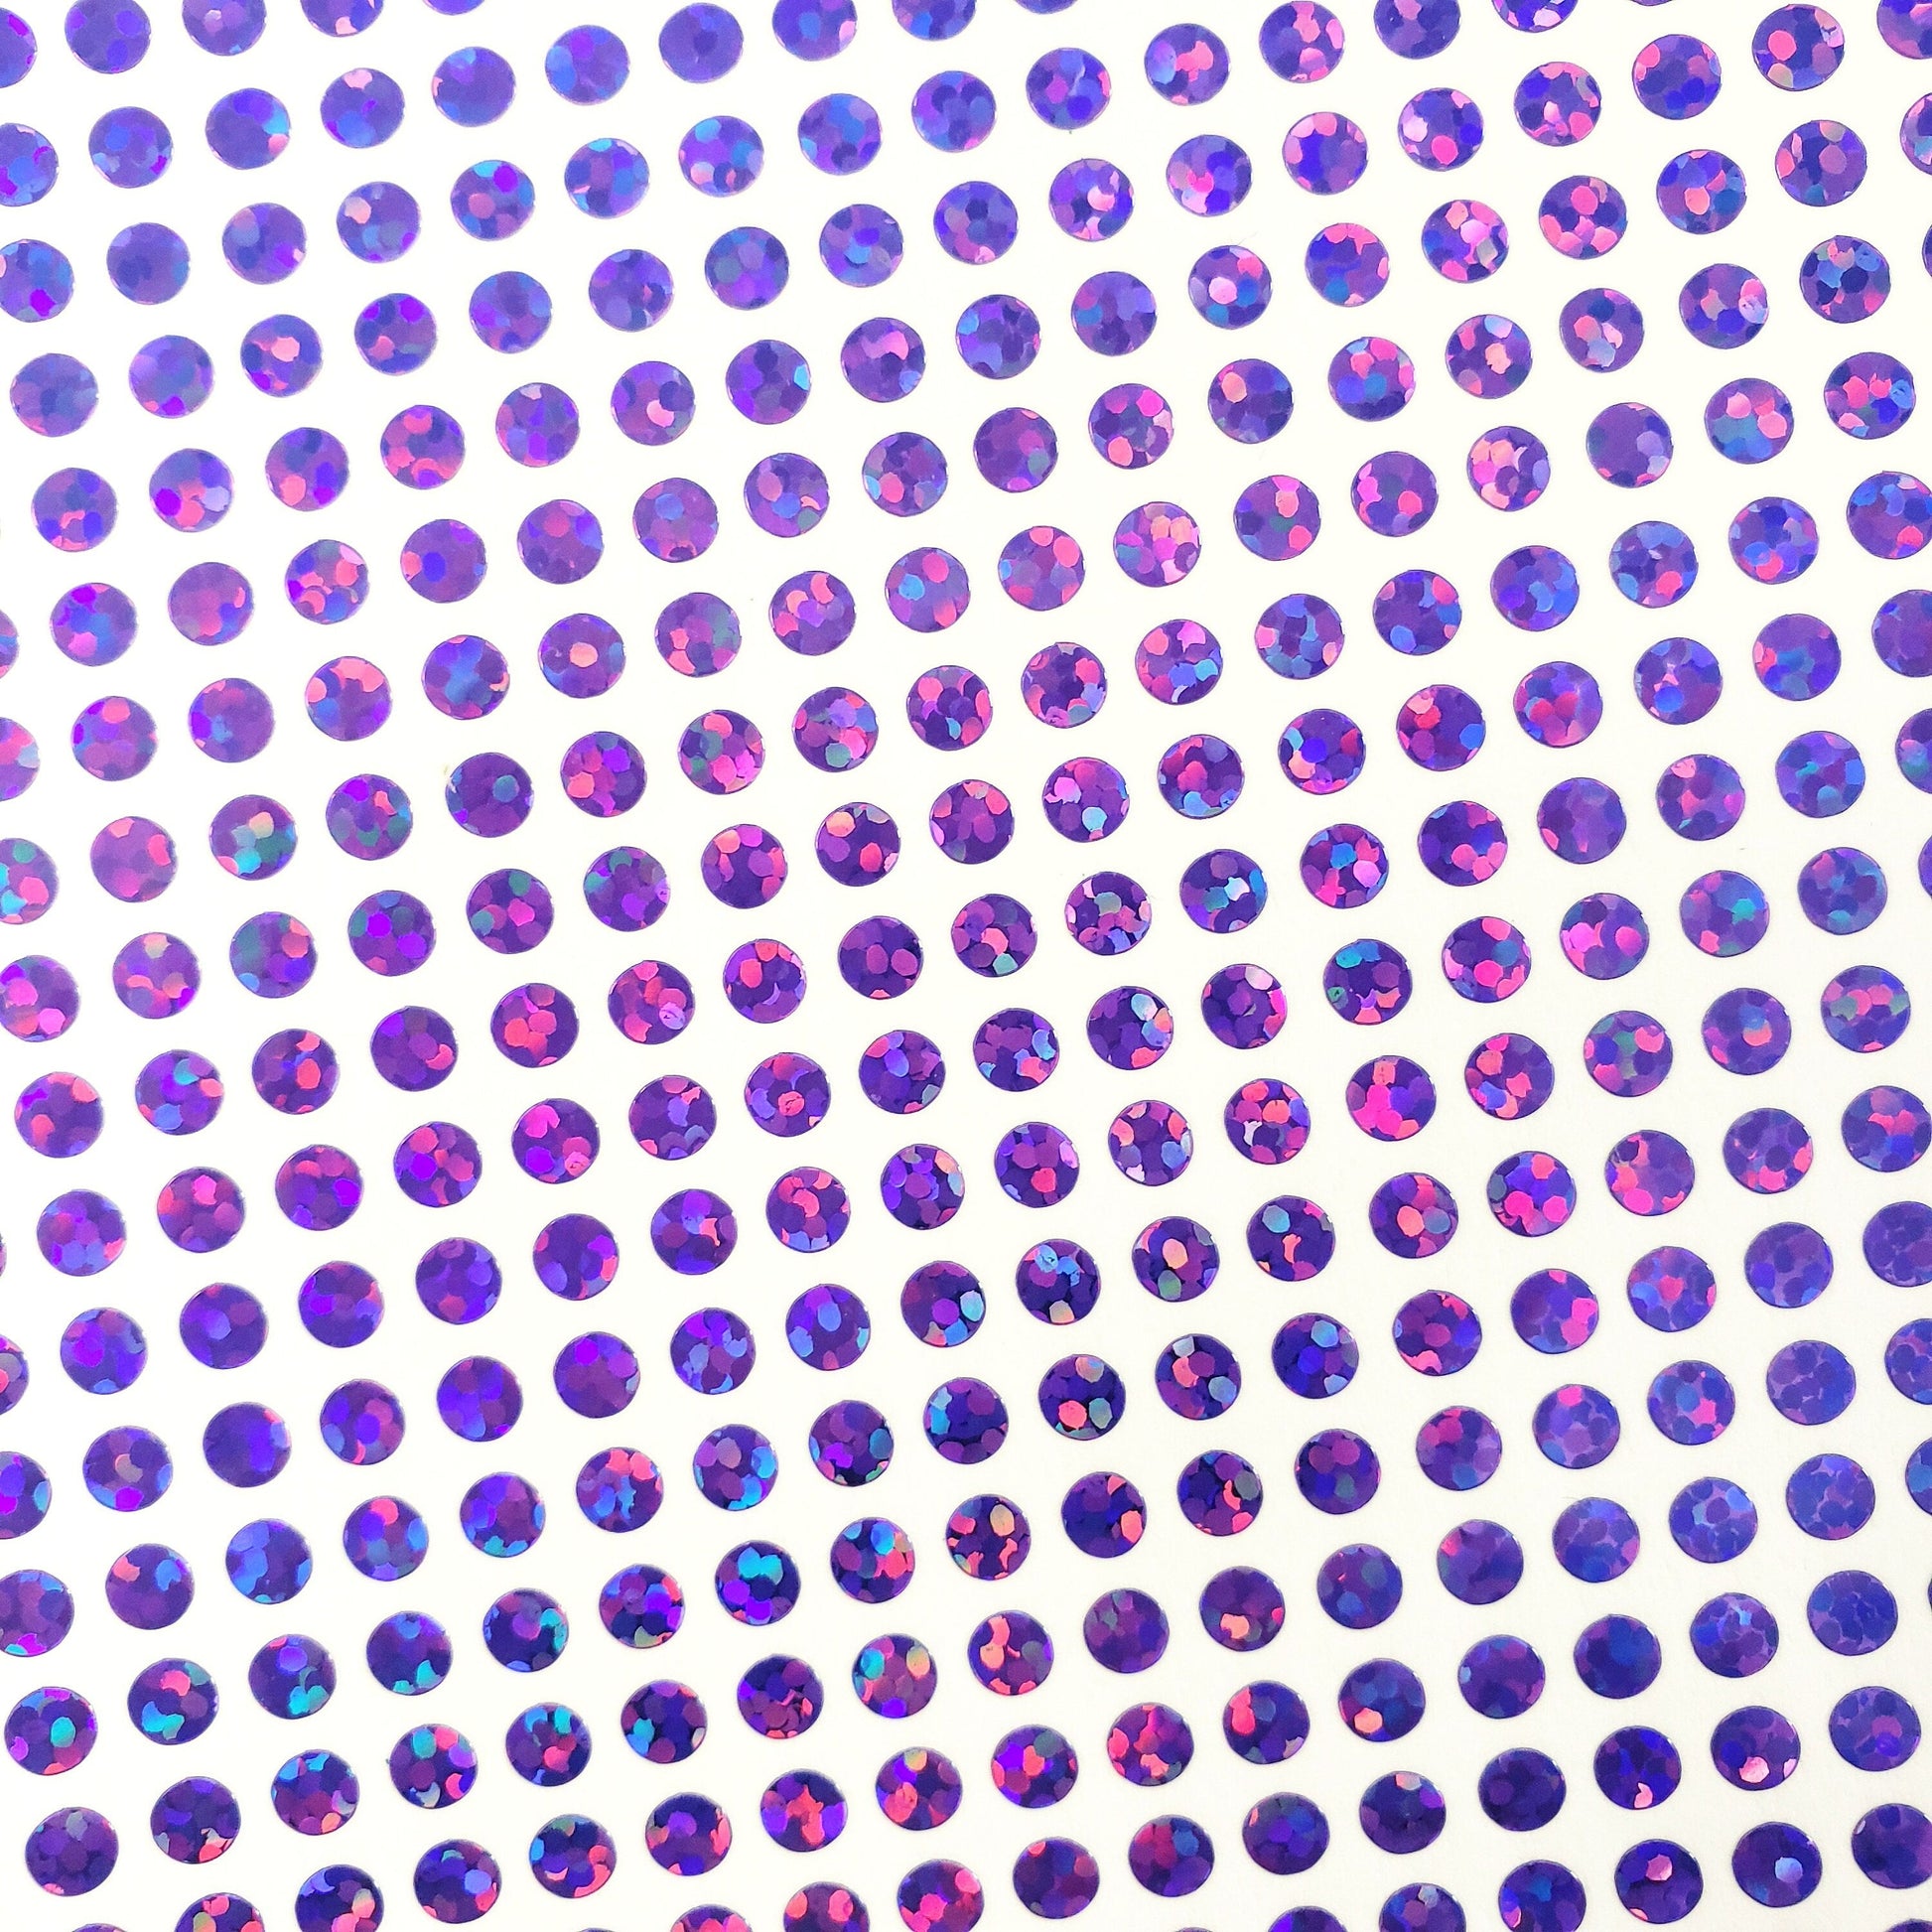 Extra Small Purple Dot Stickers, set of 750 micro sized purple glitter dots for daily journals, planners, trackers, calendars and crafts.